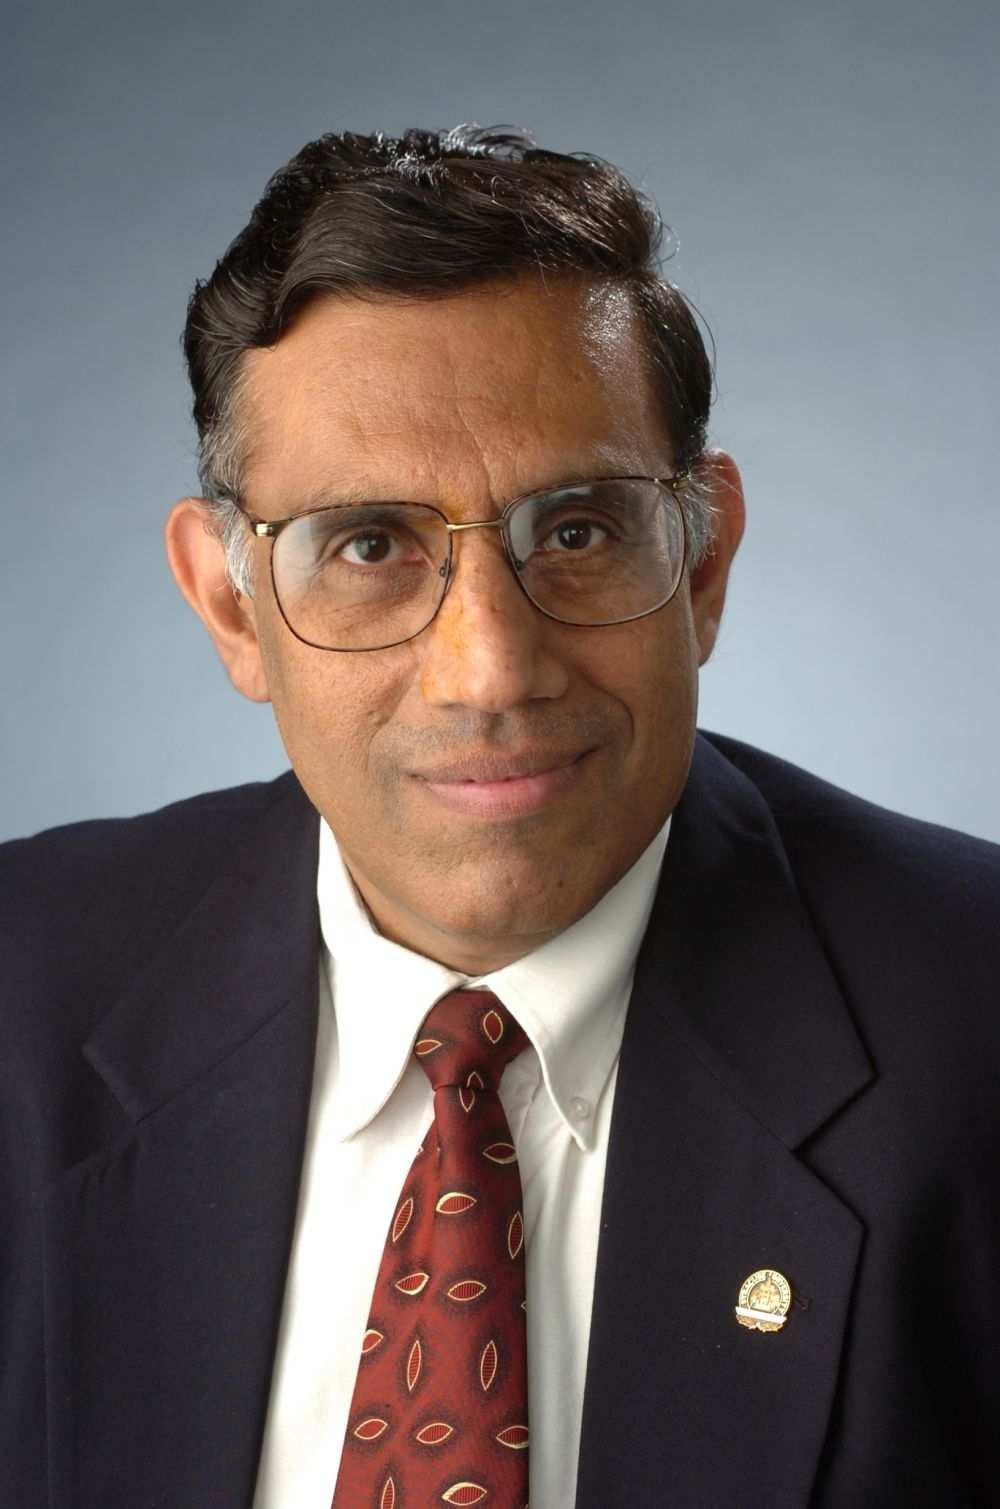 30 Pramod K. Varshney (F 97) was born in Allahabad, India, on July 1, 1952. He received the B.S. degree in electrical engineering and computer science (with highest honors) and the M.S. and Ph.D.